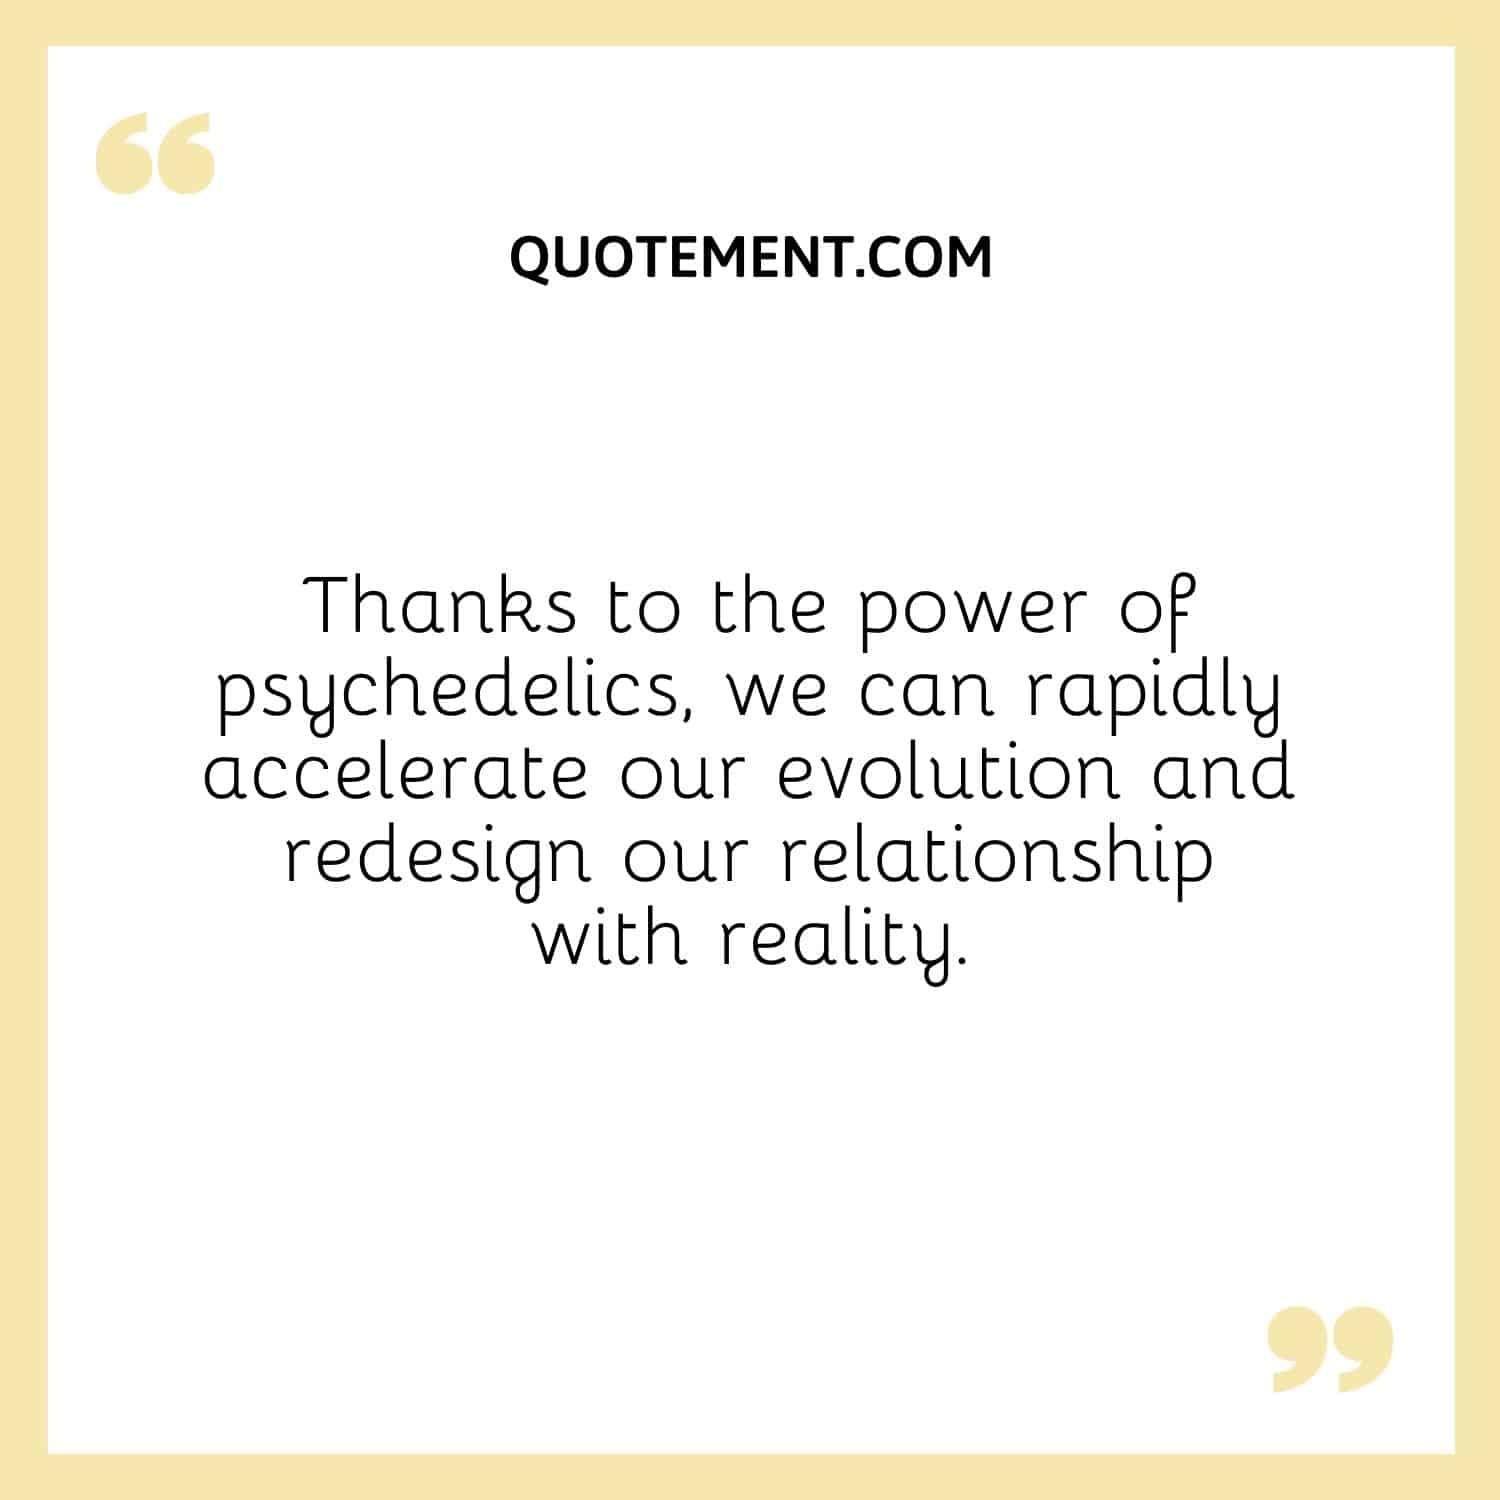 Thanks to the power of psychedelics, we can rapidly accelerate our evolution and redesign our relationship with reality.